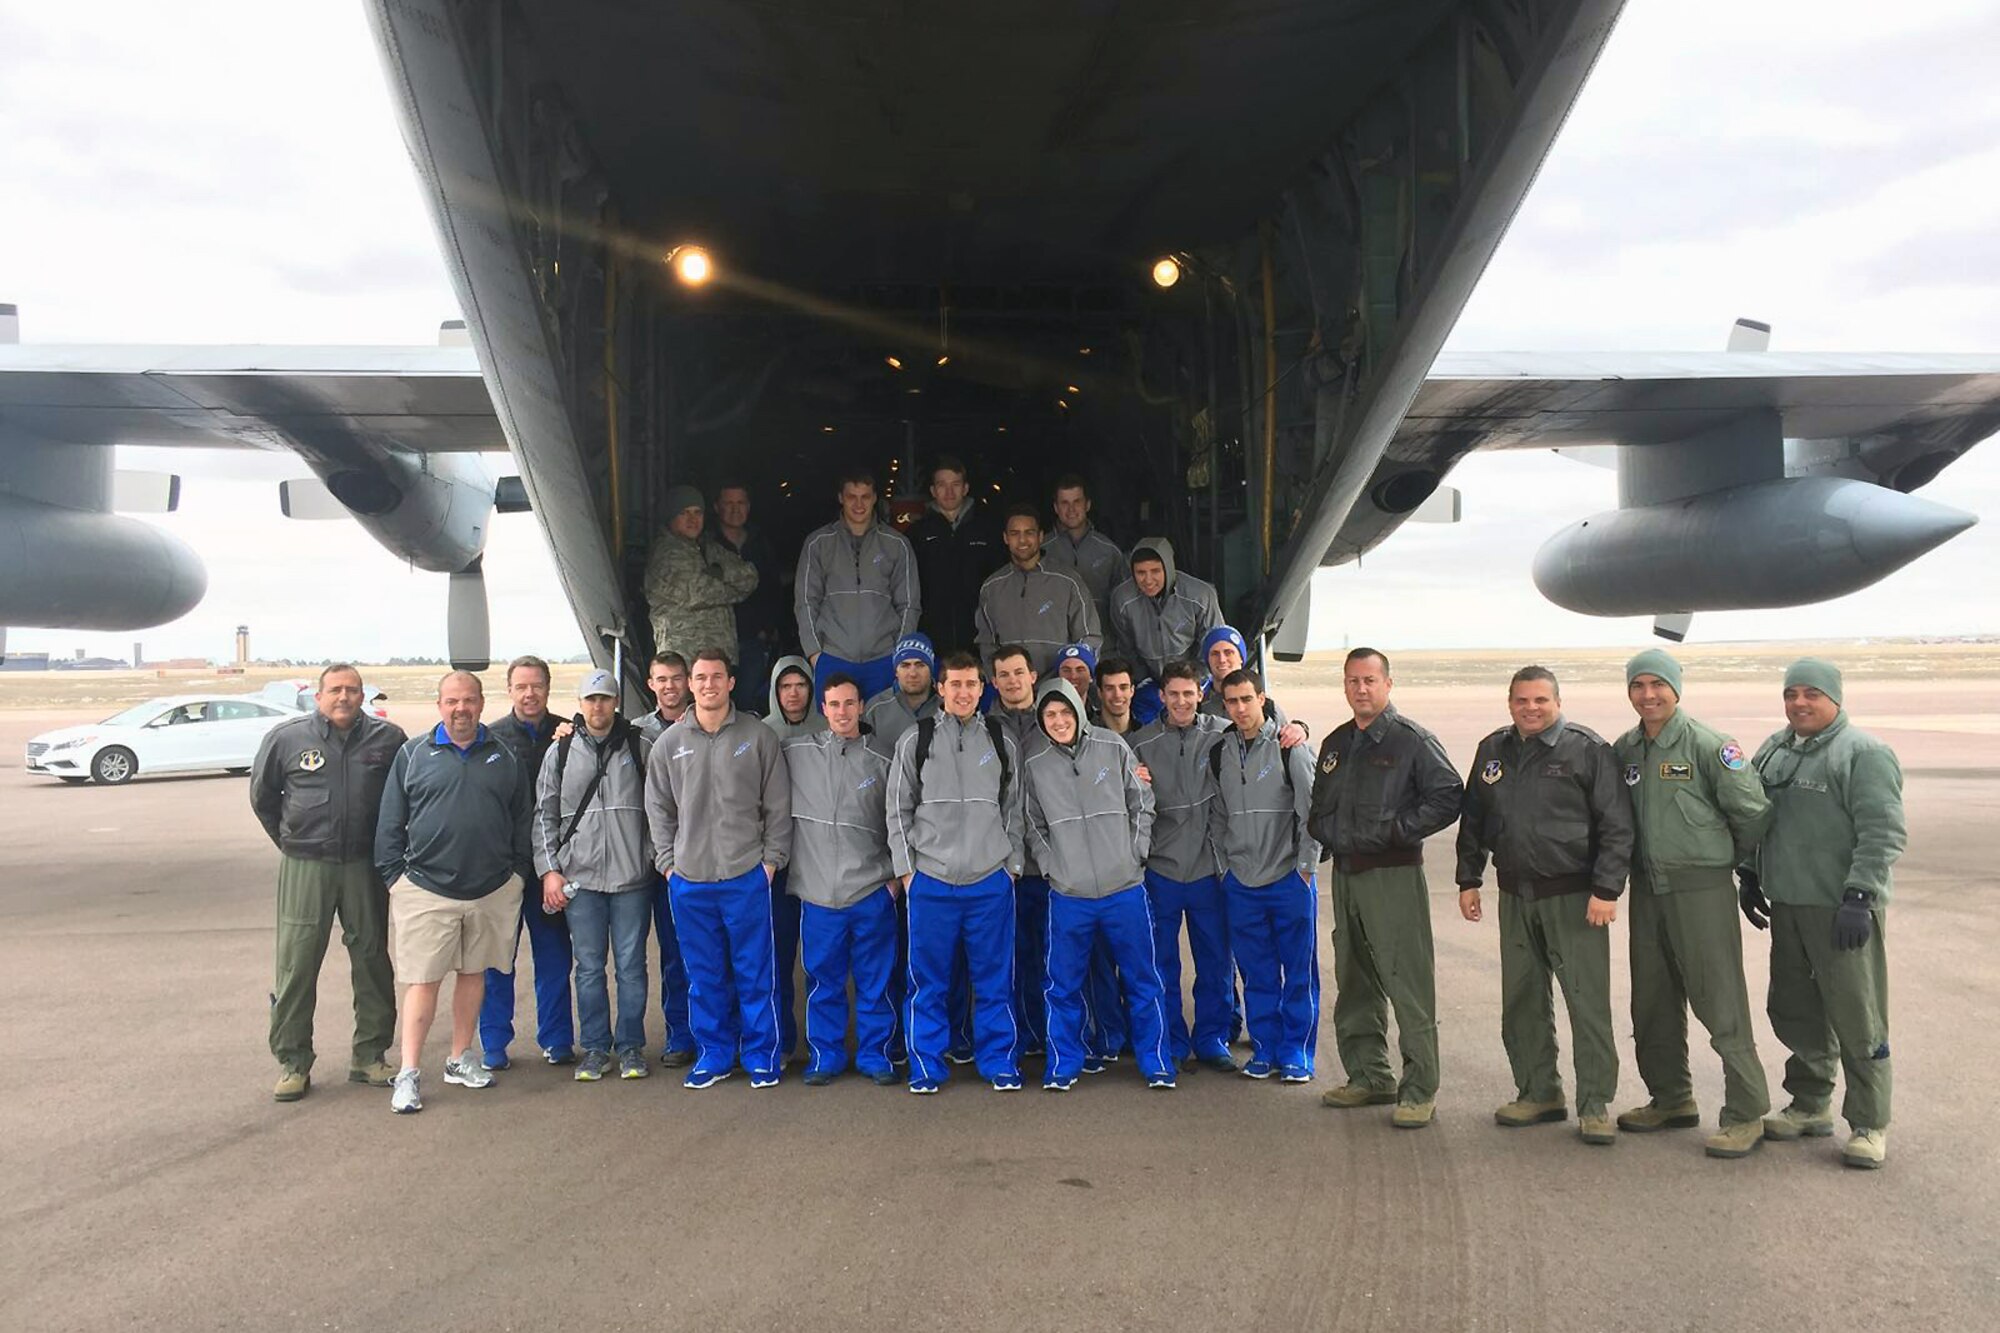 U.S. airmen of the 156th Operations Group, Puerto Rico Air National Guard, provide airlift transport on a WC-130 Hercules aircraft to the U.S. Air Force Academy ice hockey team from Rochester, N.Y. to Colorado Springs, Colo., Mar 19. The 156th Airlift Wing deployed one of its WC-130 Hercules aircraft March 18 from Muñiz Air National Guard Base, Carolina, Puerto Rico to Rochester, N.Y. in support of the Air National Guard weekend dedicated airlift mission. (U.S. Air National Guard photo by Maj. Luis Martinez)